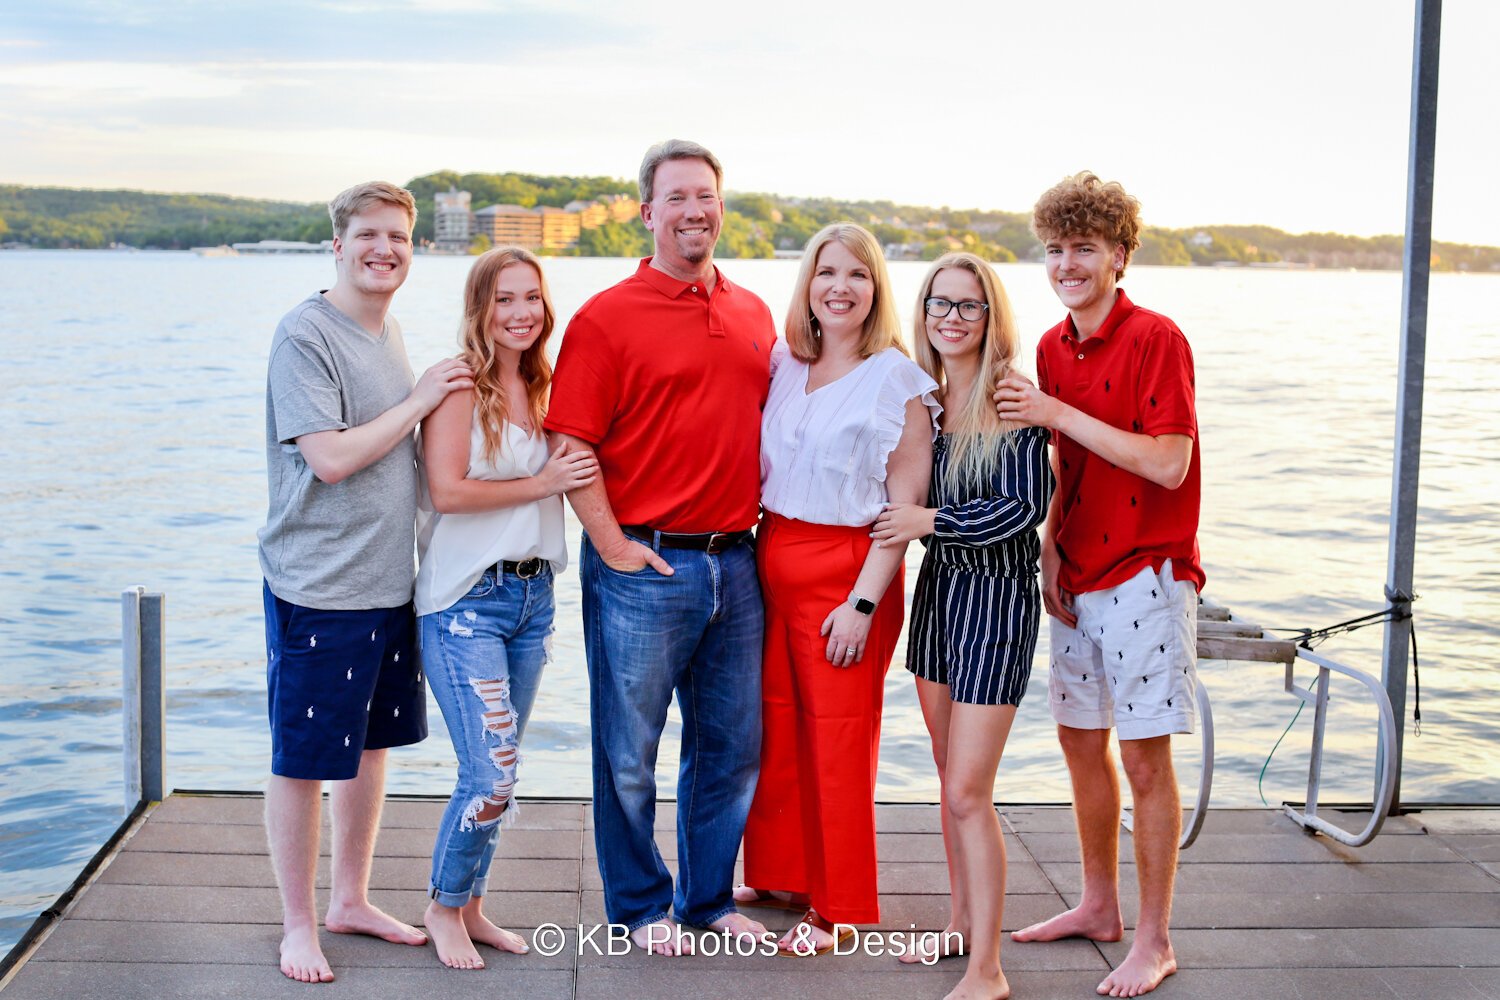 Family+Photography+Lake+of+the+Ozarks+Missouri+relaxed+sunset+dock+photos+KB+Photos+and+Design+(4).JPG